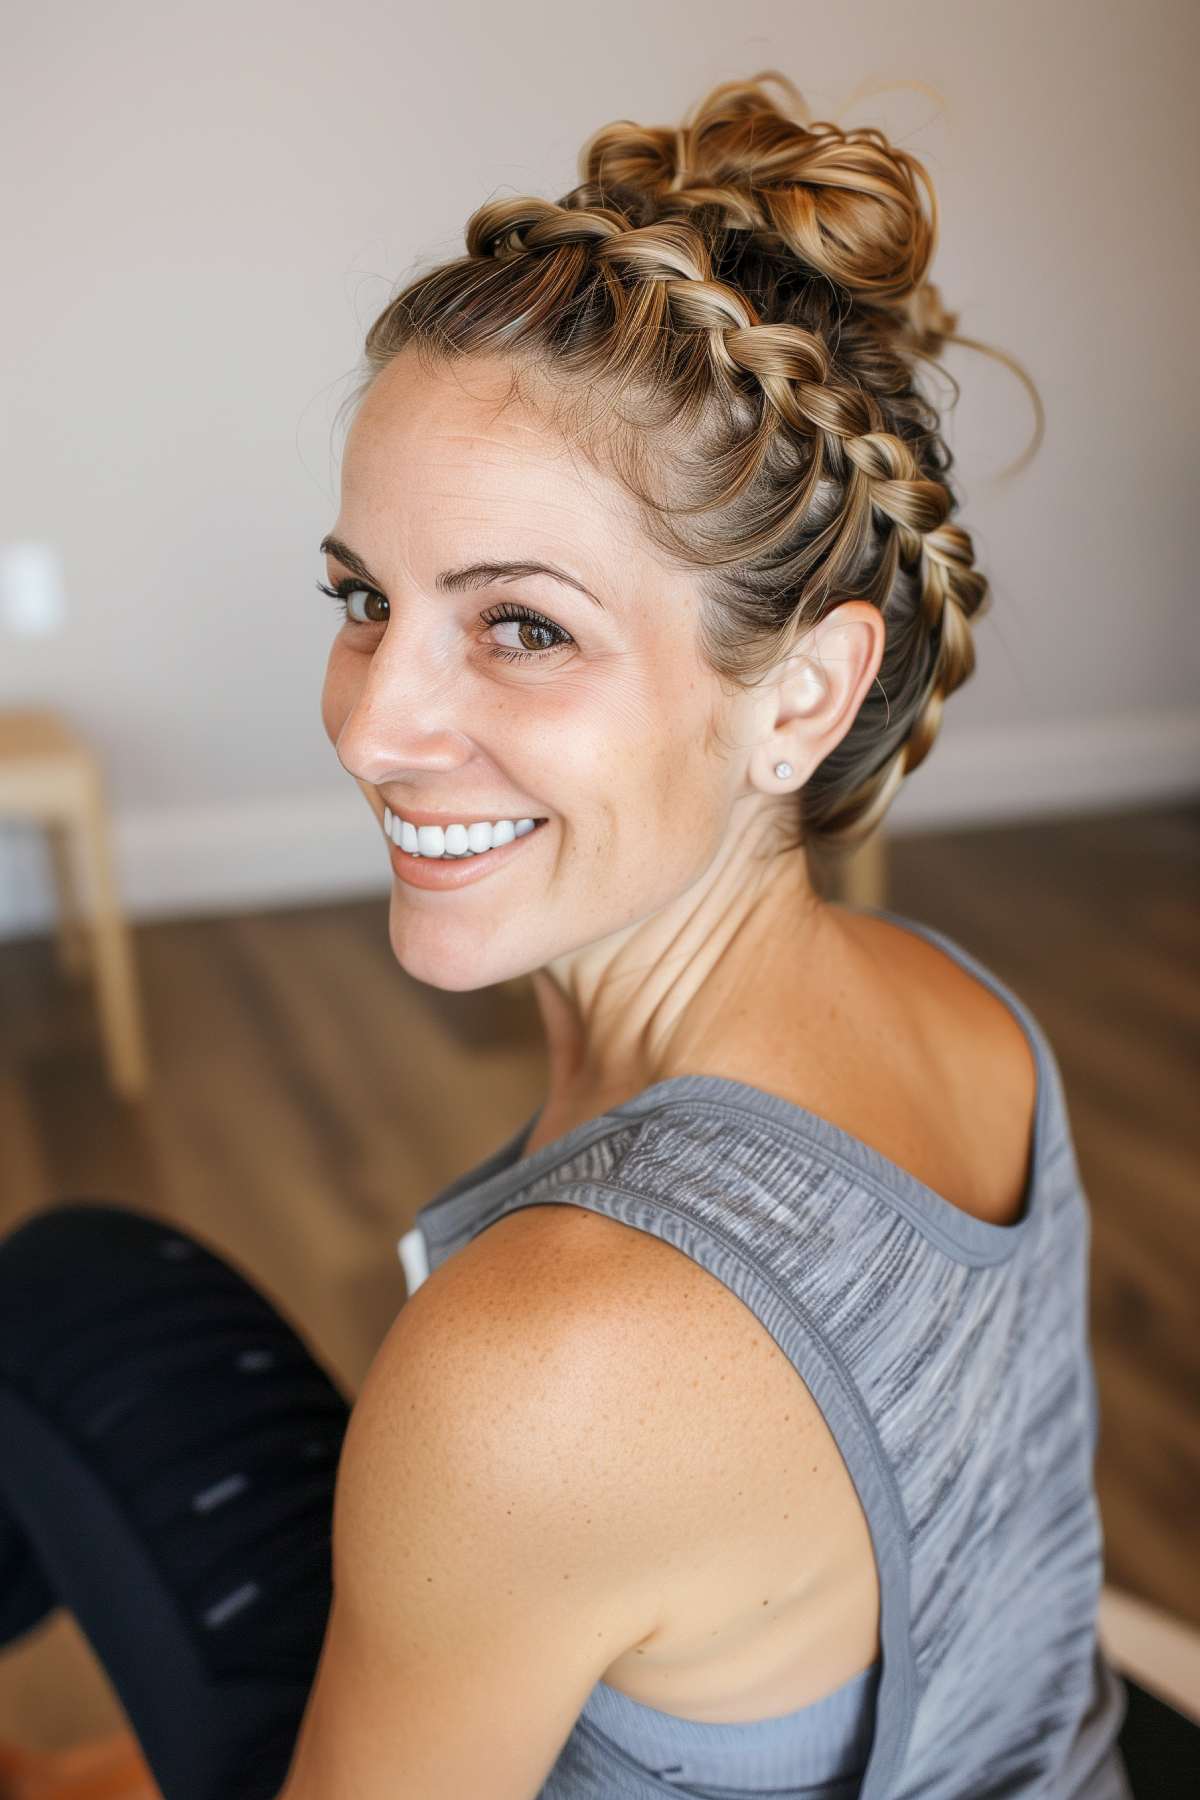 Active woman sporting a braided updo starting as a French braid and ending in a messy bun at the crown, ideal for workout and casual settings.